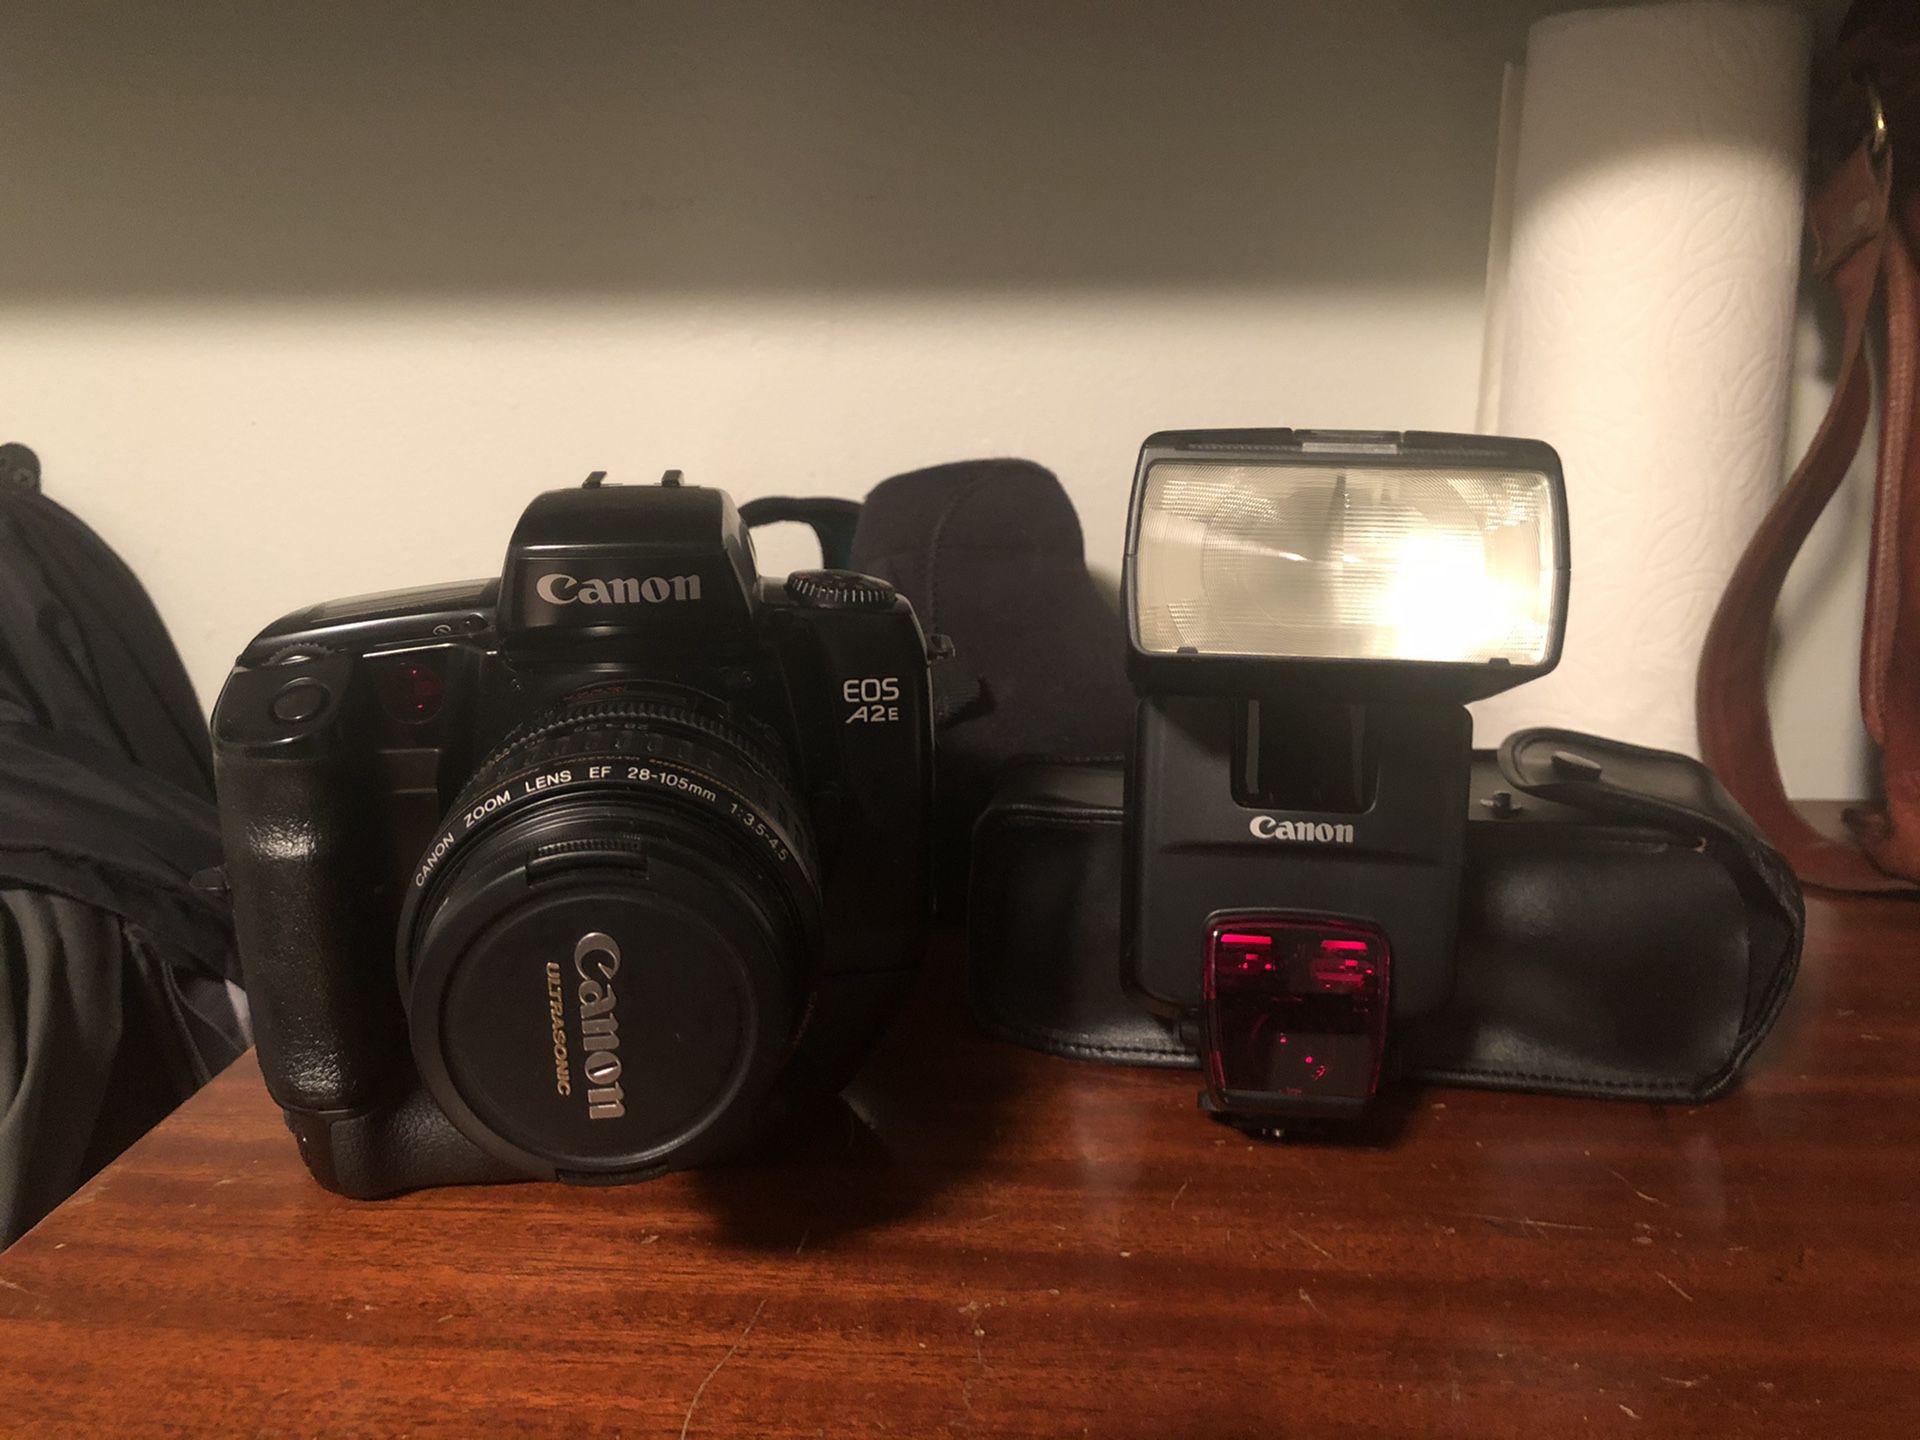 Canon A2e film camera with complete setup which includes: 550EX Speedlite flash, VG-10 motorized vertical grip, and Canon Ultrasonic 28-105 AF Lens